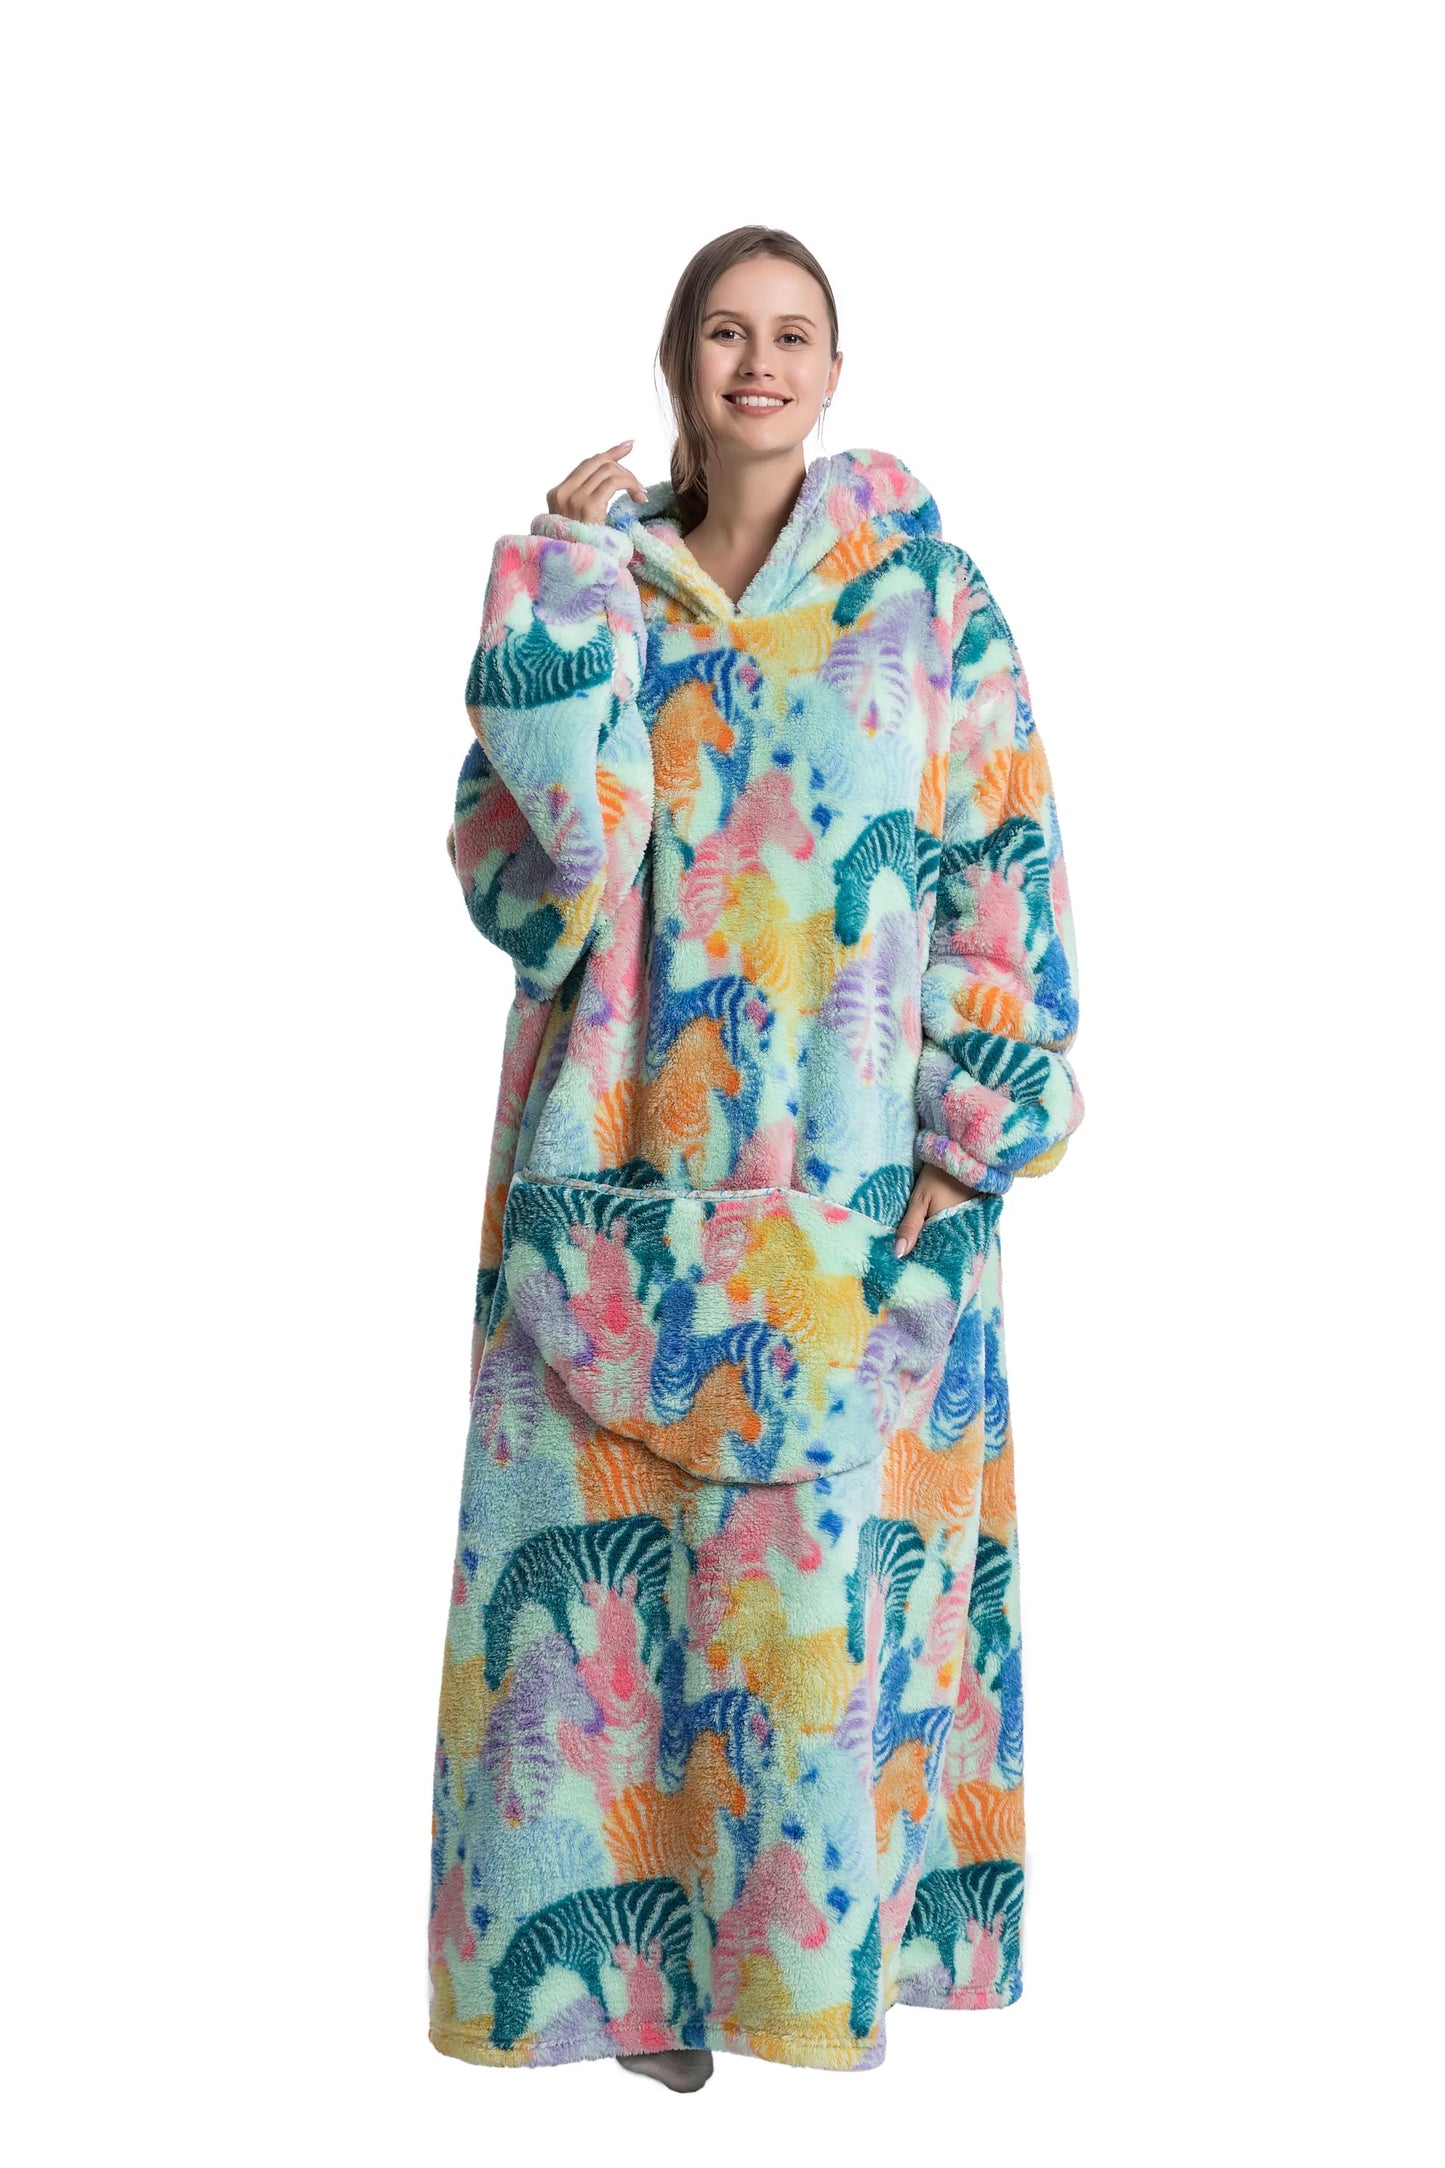 Oversized Blanket Hoodie for Adults